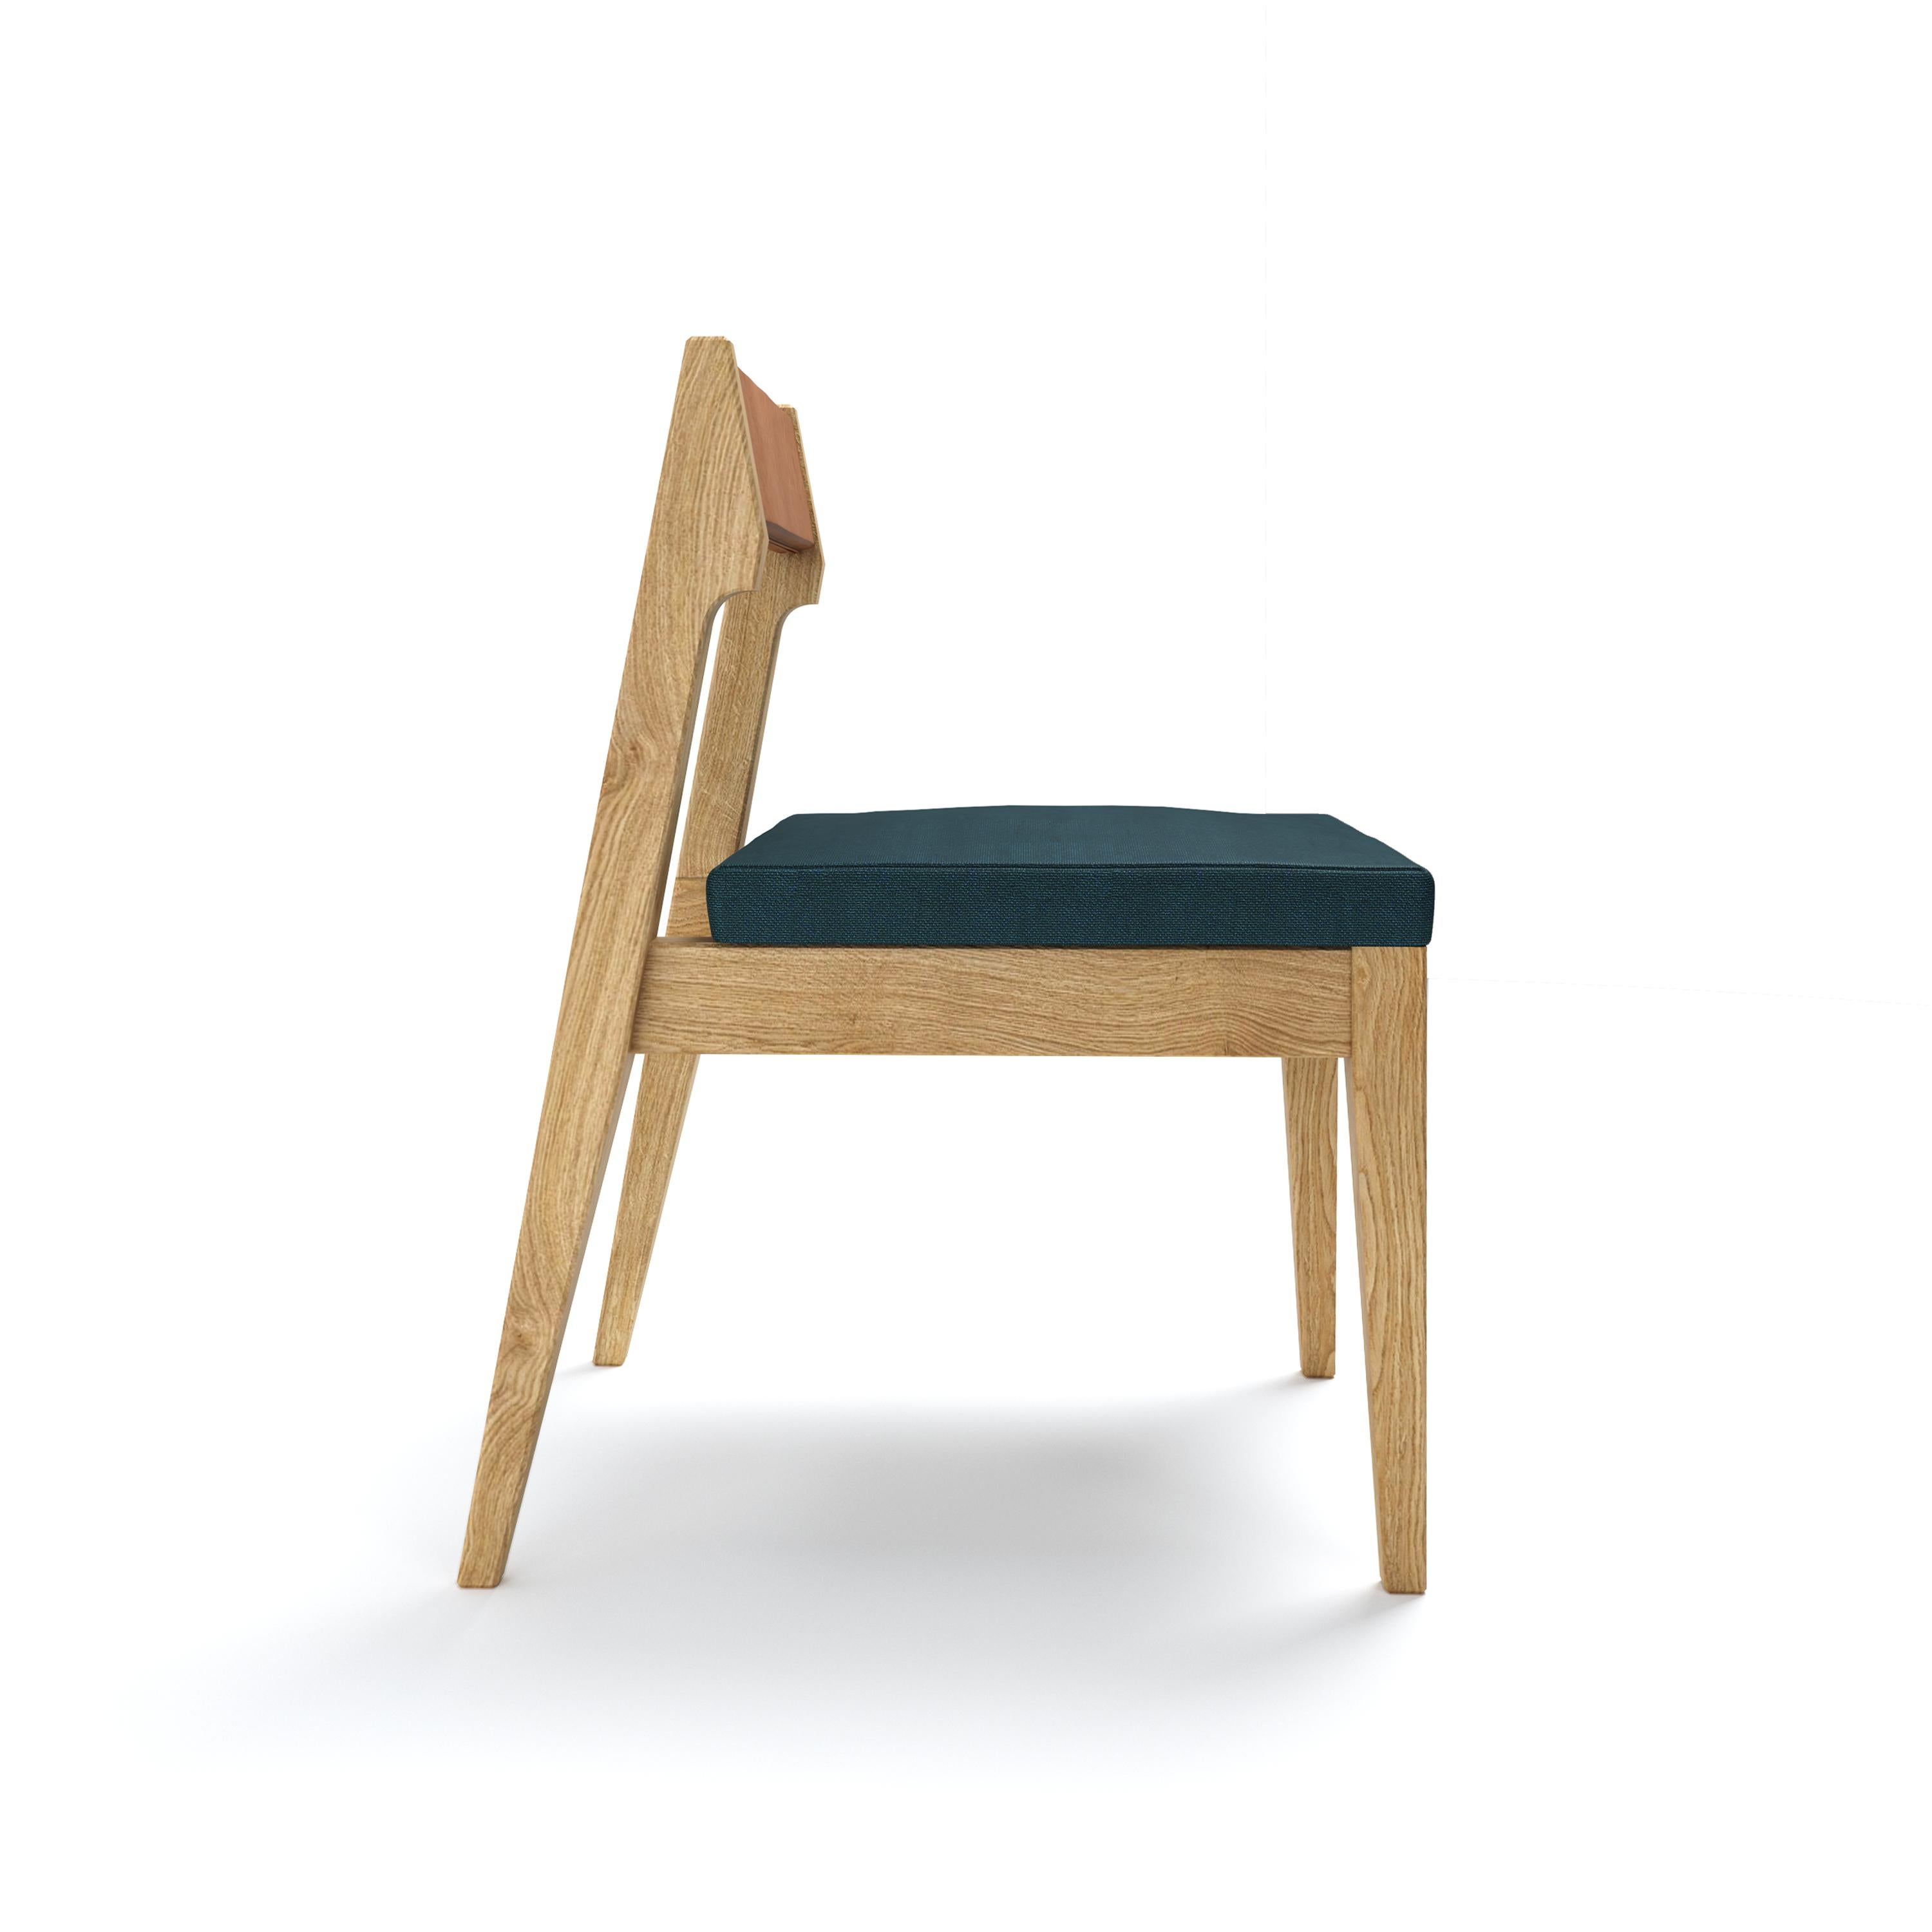 Talvi L-Dining Chair is the perfect combination of comfort and style. Upgrading your dining room, this dining chair is crafted from high-quality massive oak wood with leather through the design, providing a unique look and lasting durability. 

All